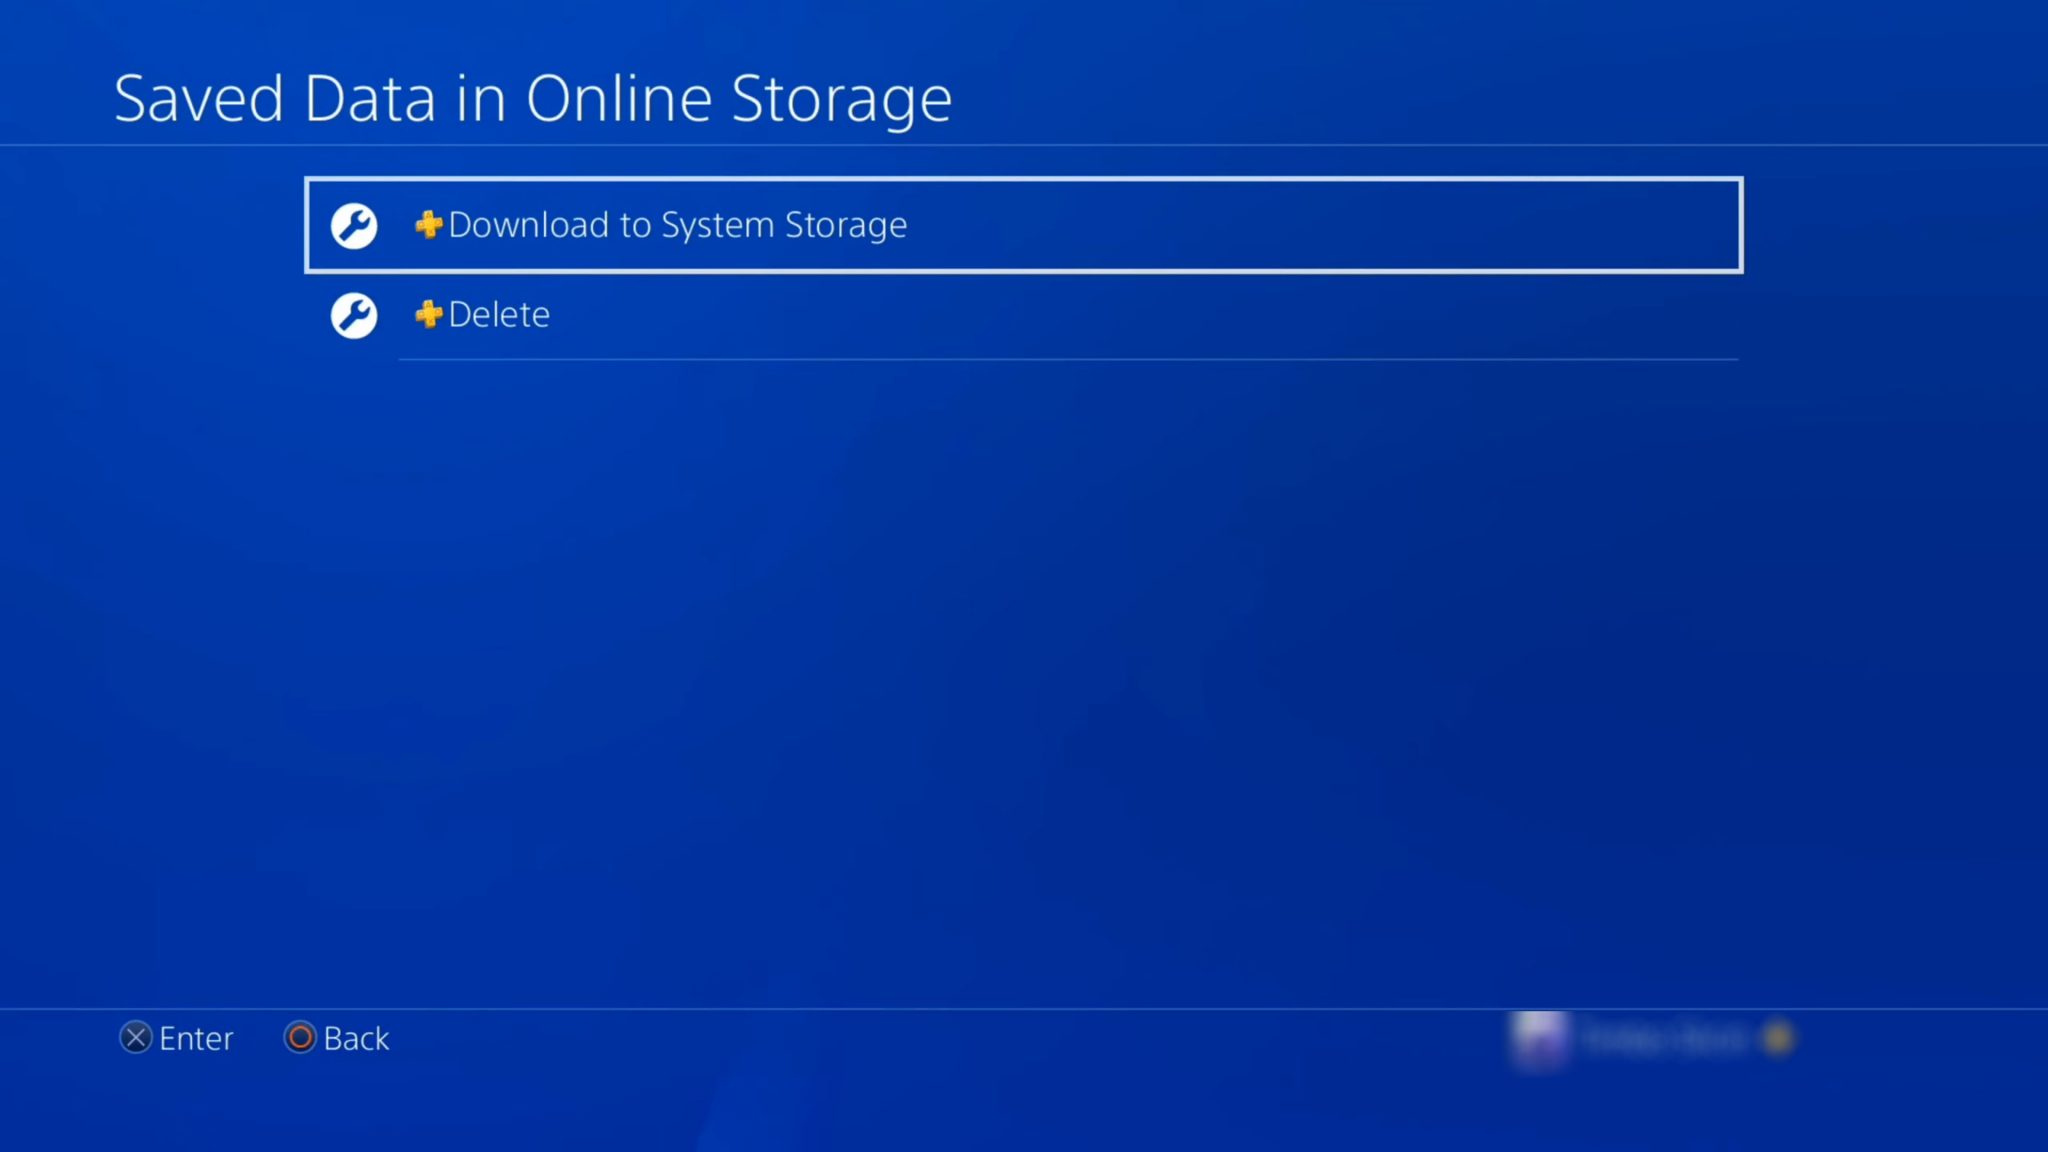 Proceed to Download to System Storage